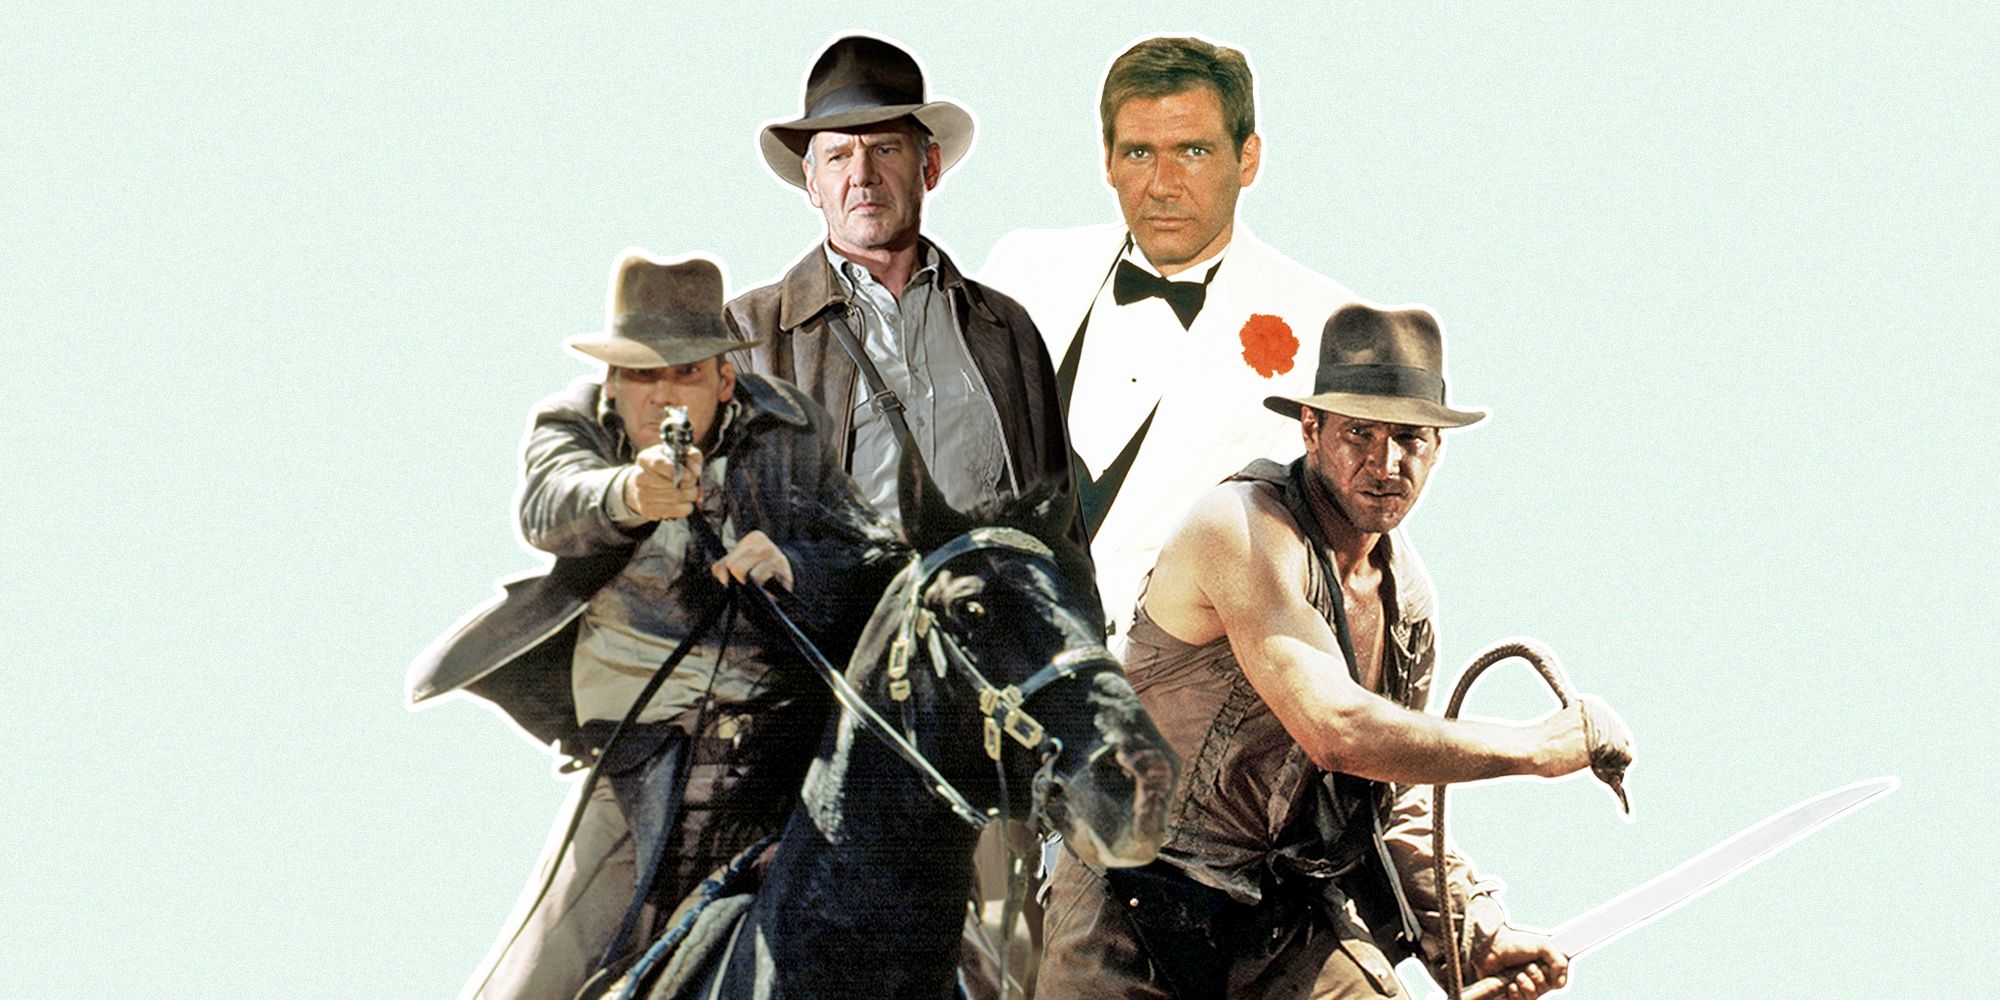 The new Indiana Jones movie finds a very different inspiration from the  first one.